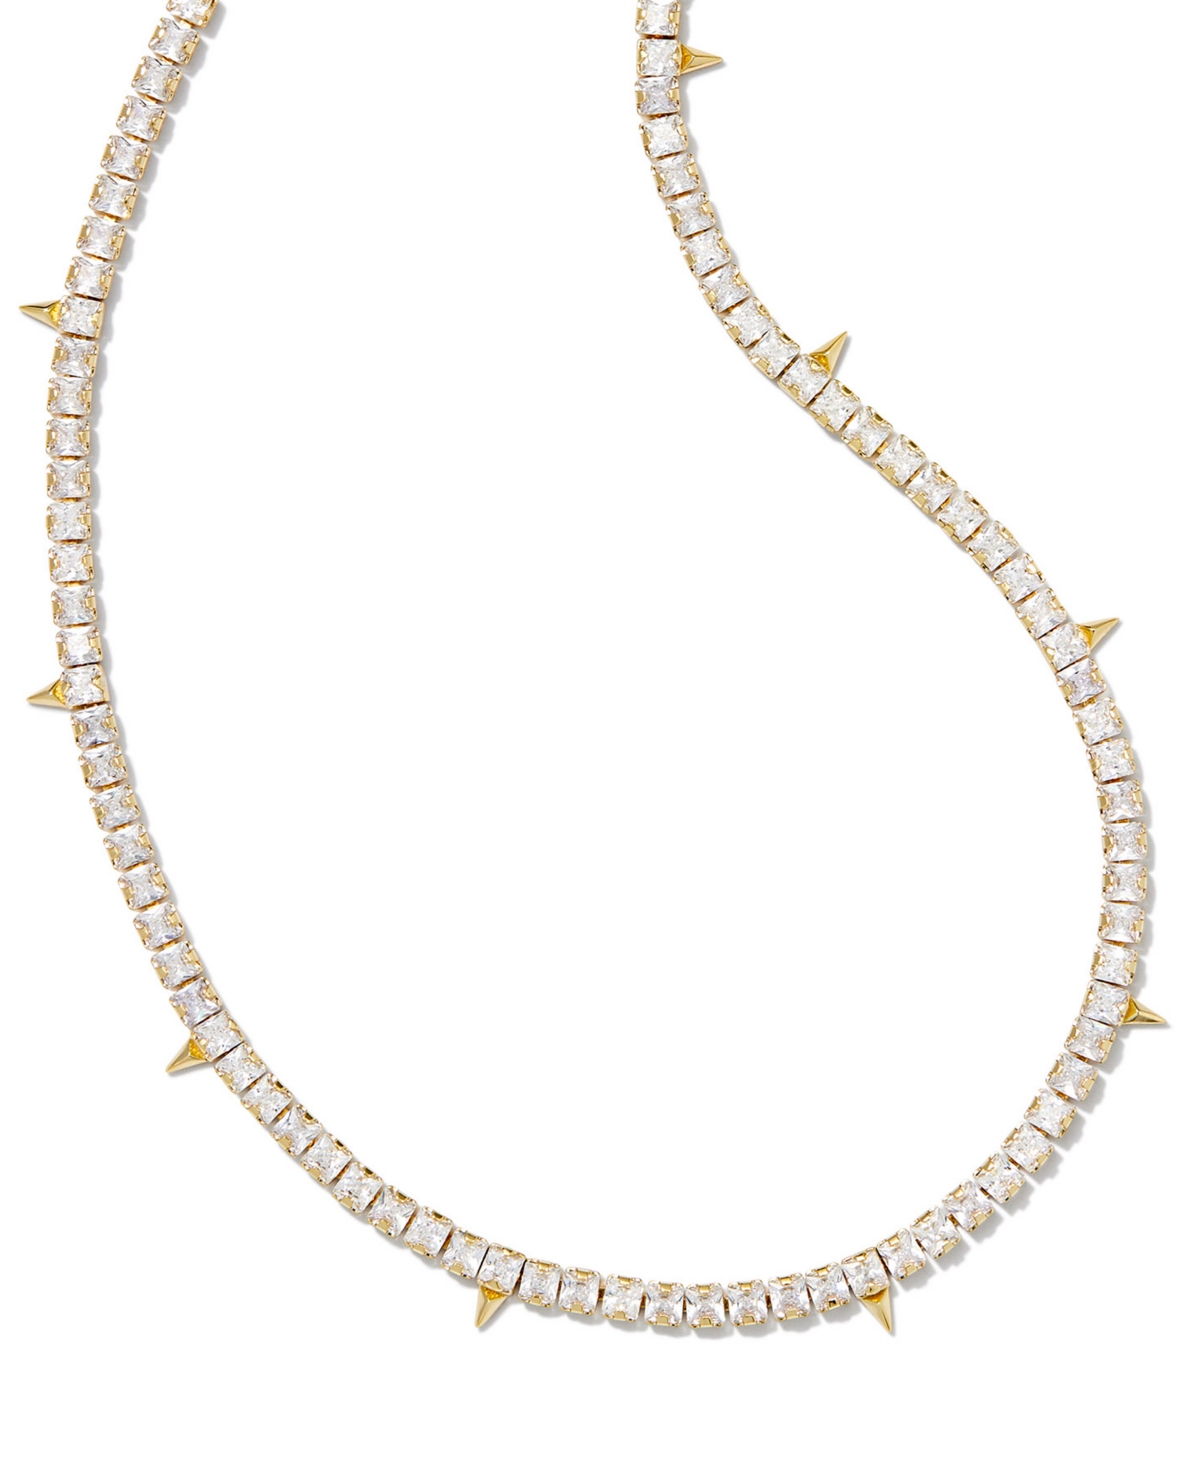 Kendra Scott 14k Gold-plated Spike Cubic Zirconia 17" Adjustable Tennis Necklace In Gold White Crystal